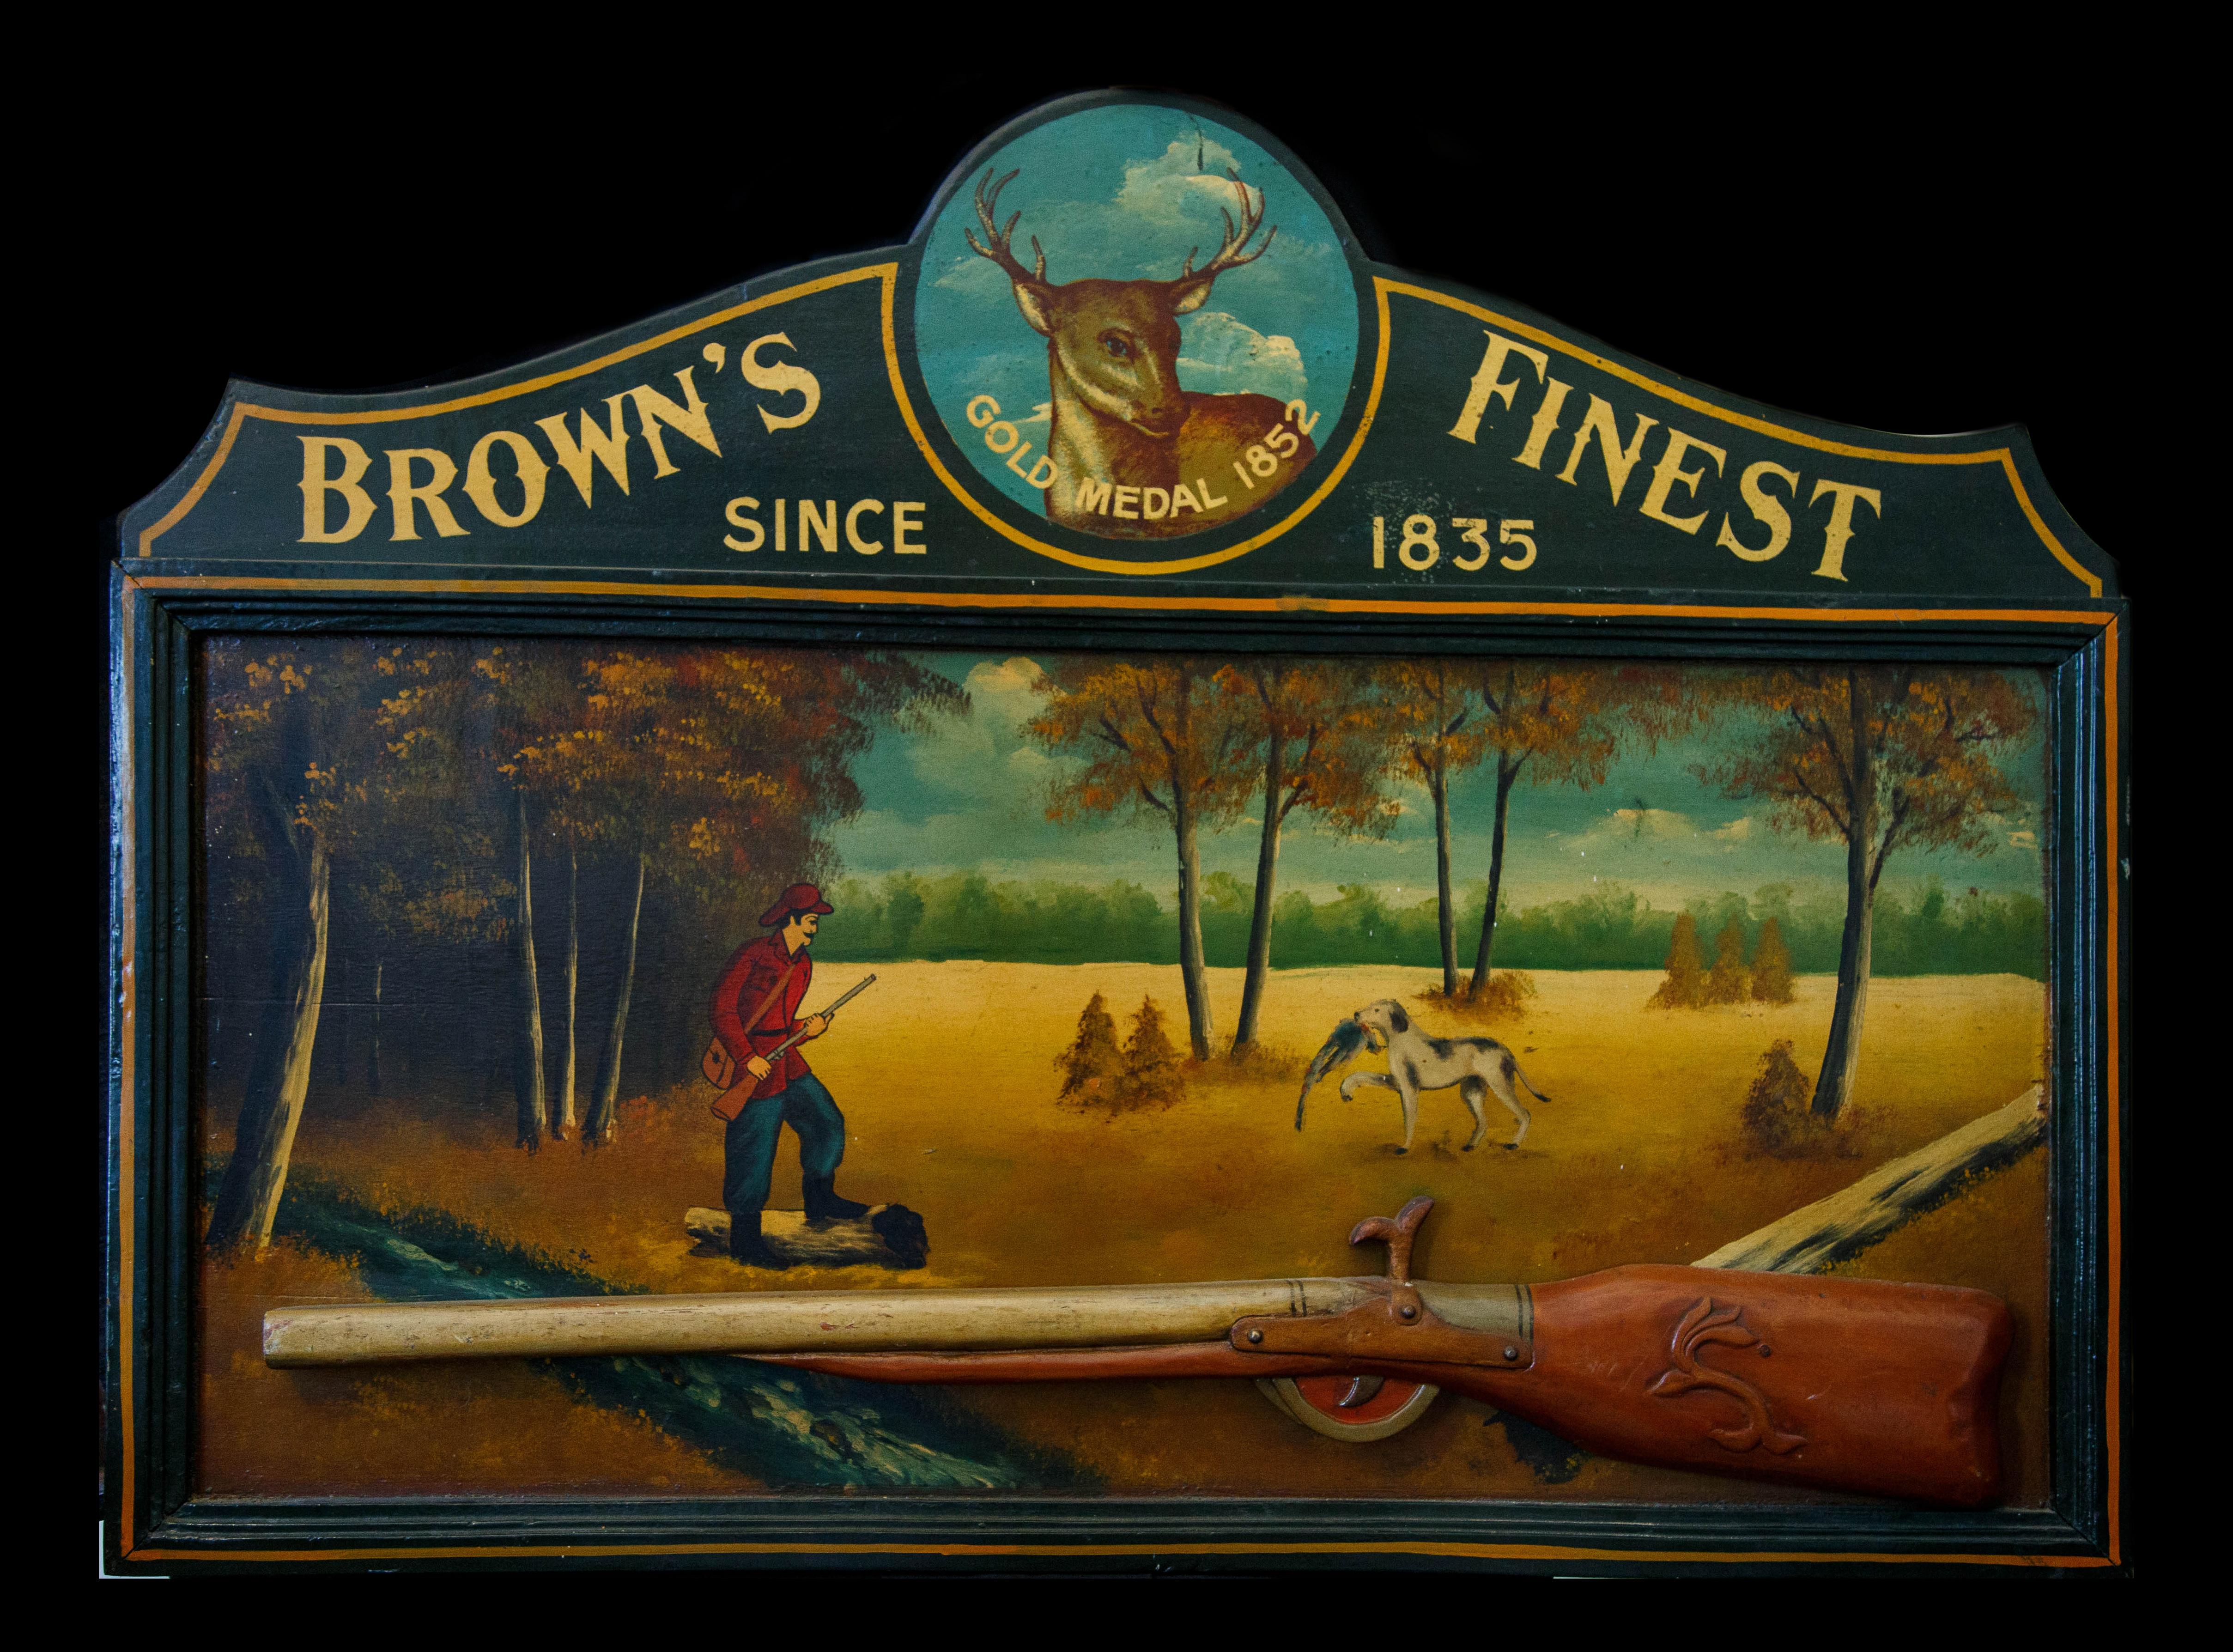 A 'Brown’s Finest' Sporting sign - Mixed Media Art by Unknown